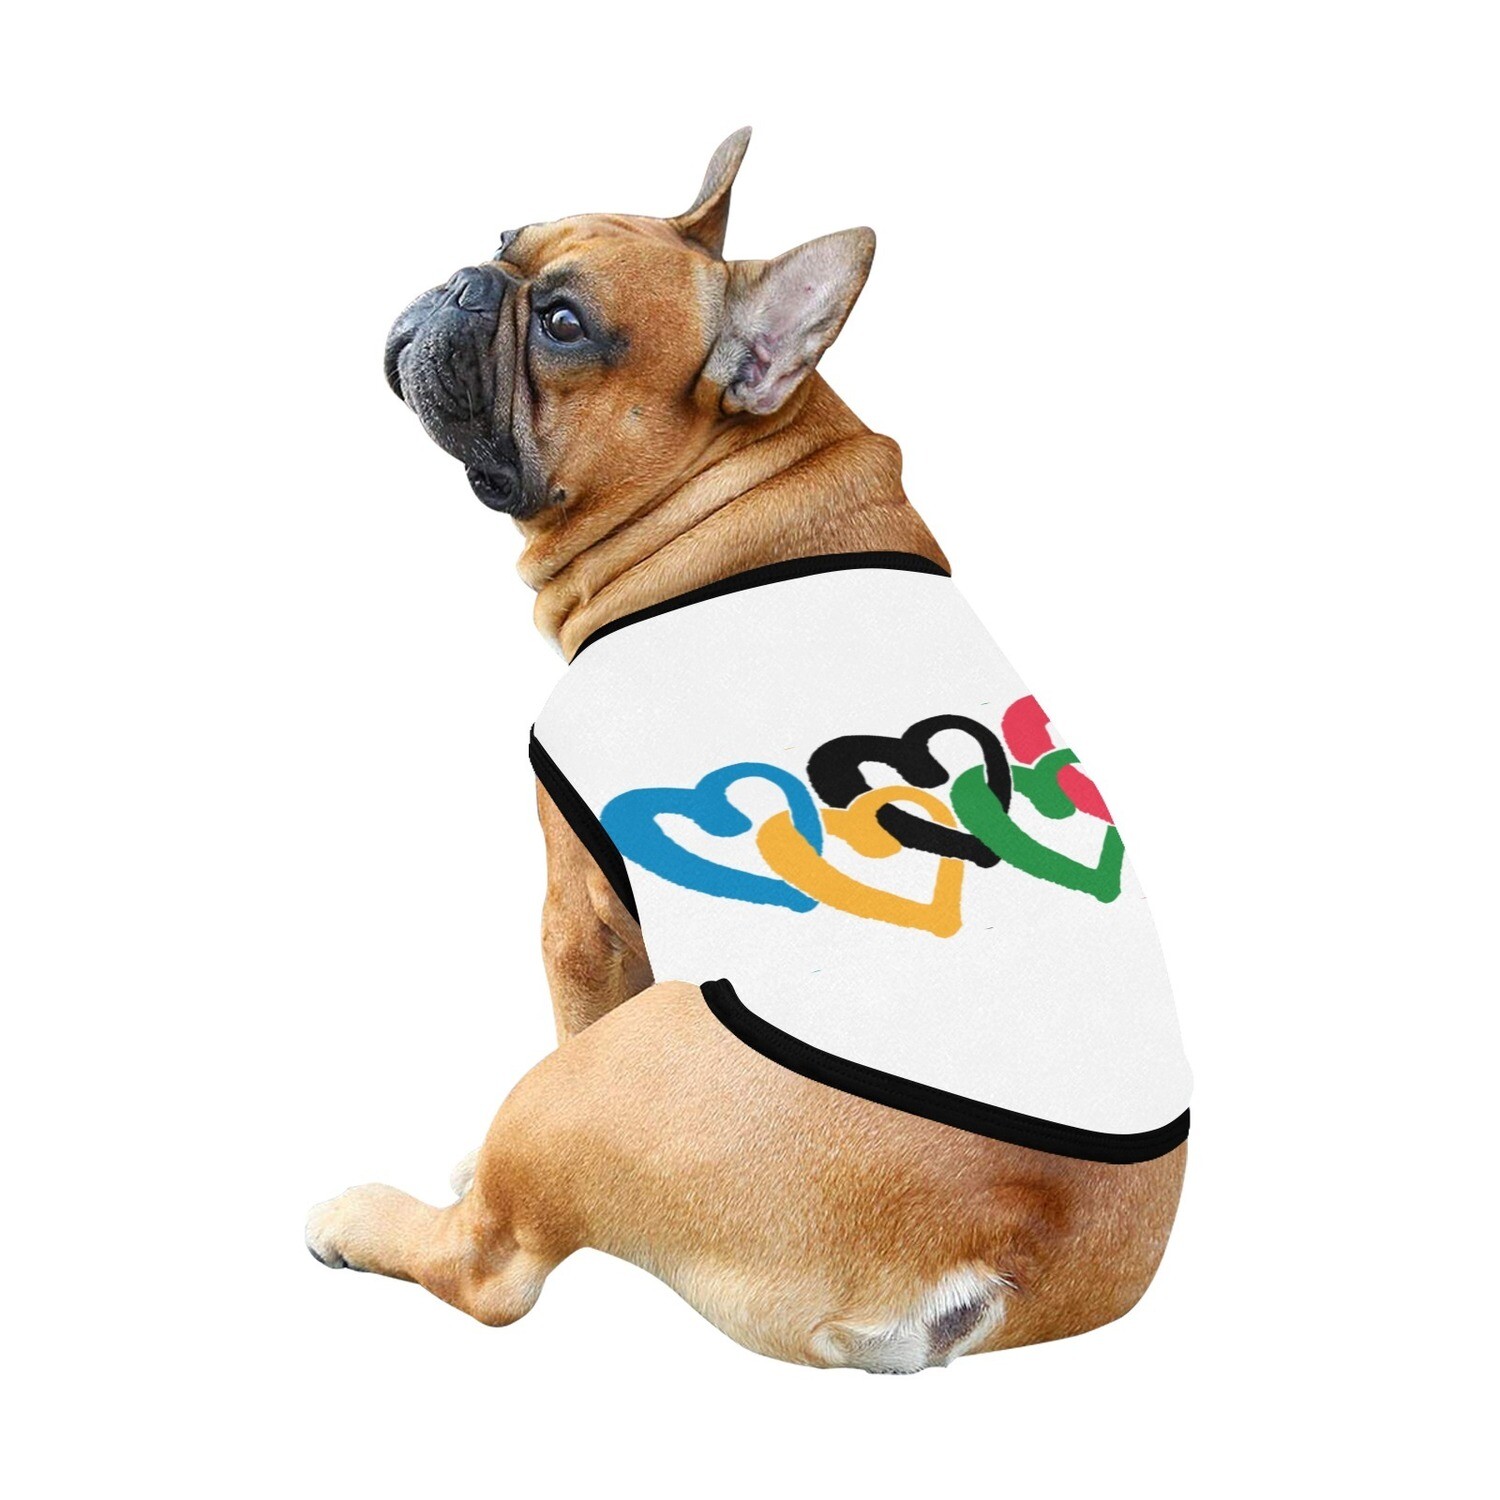 🐕 I love Sports, Olympic Rings, Hearts, Game on! dog t-shirt, dog gift, dog tank top, dog shirt, dog clothes, gift, 7 sizes XS to 3XL, white